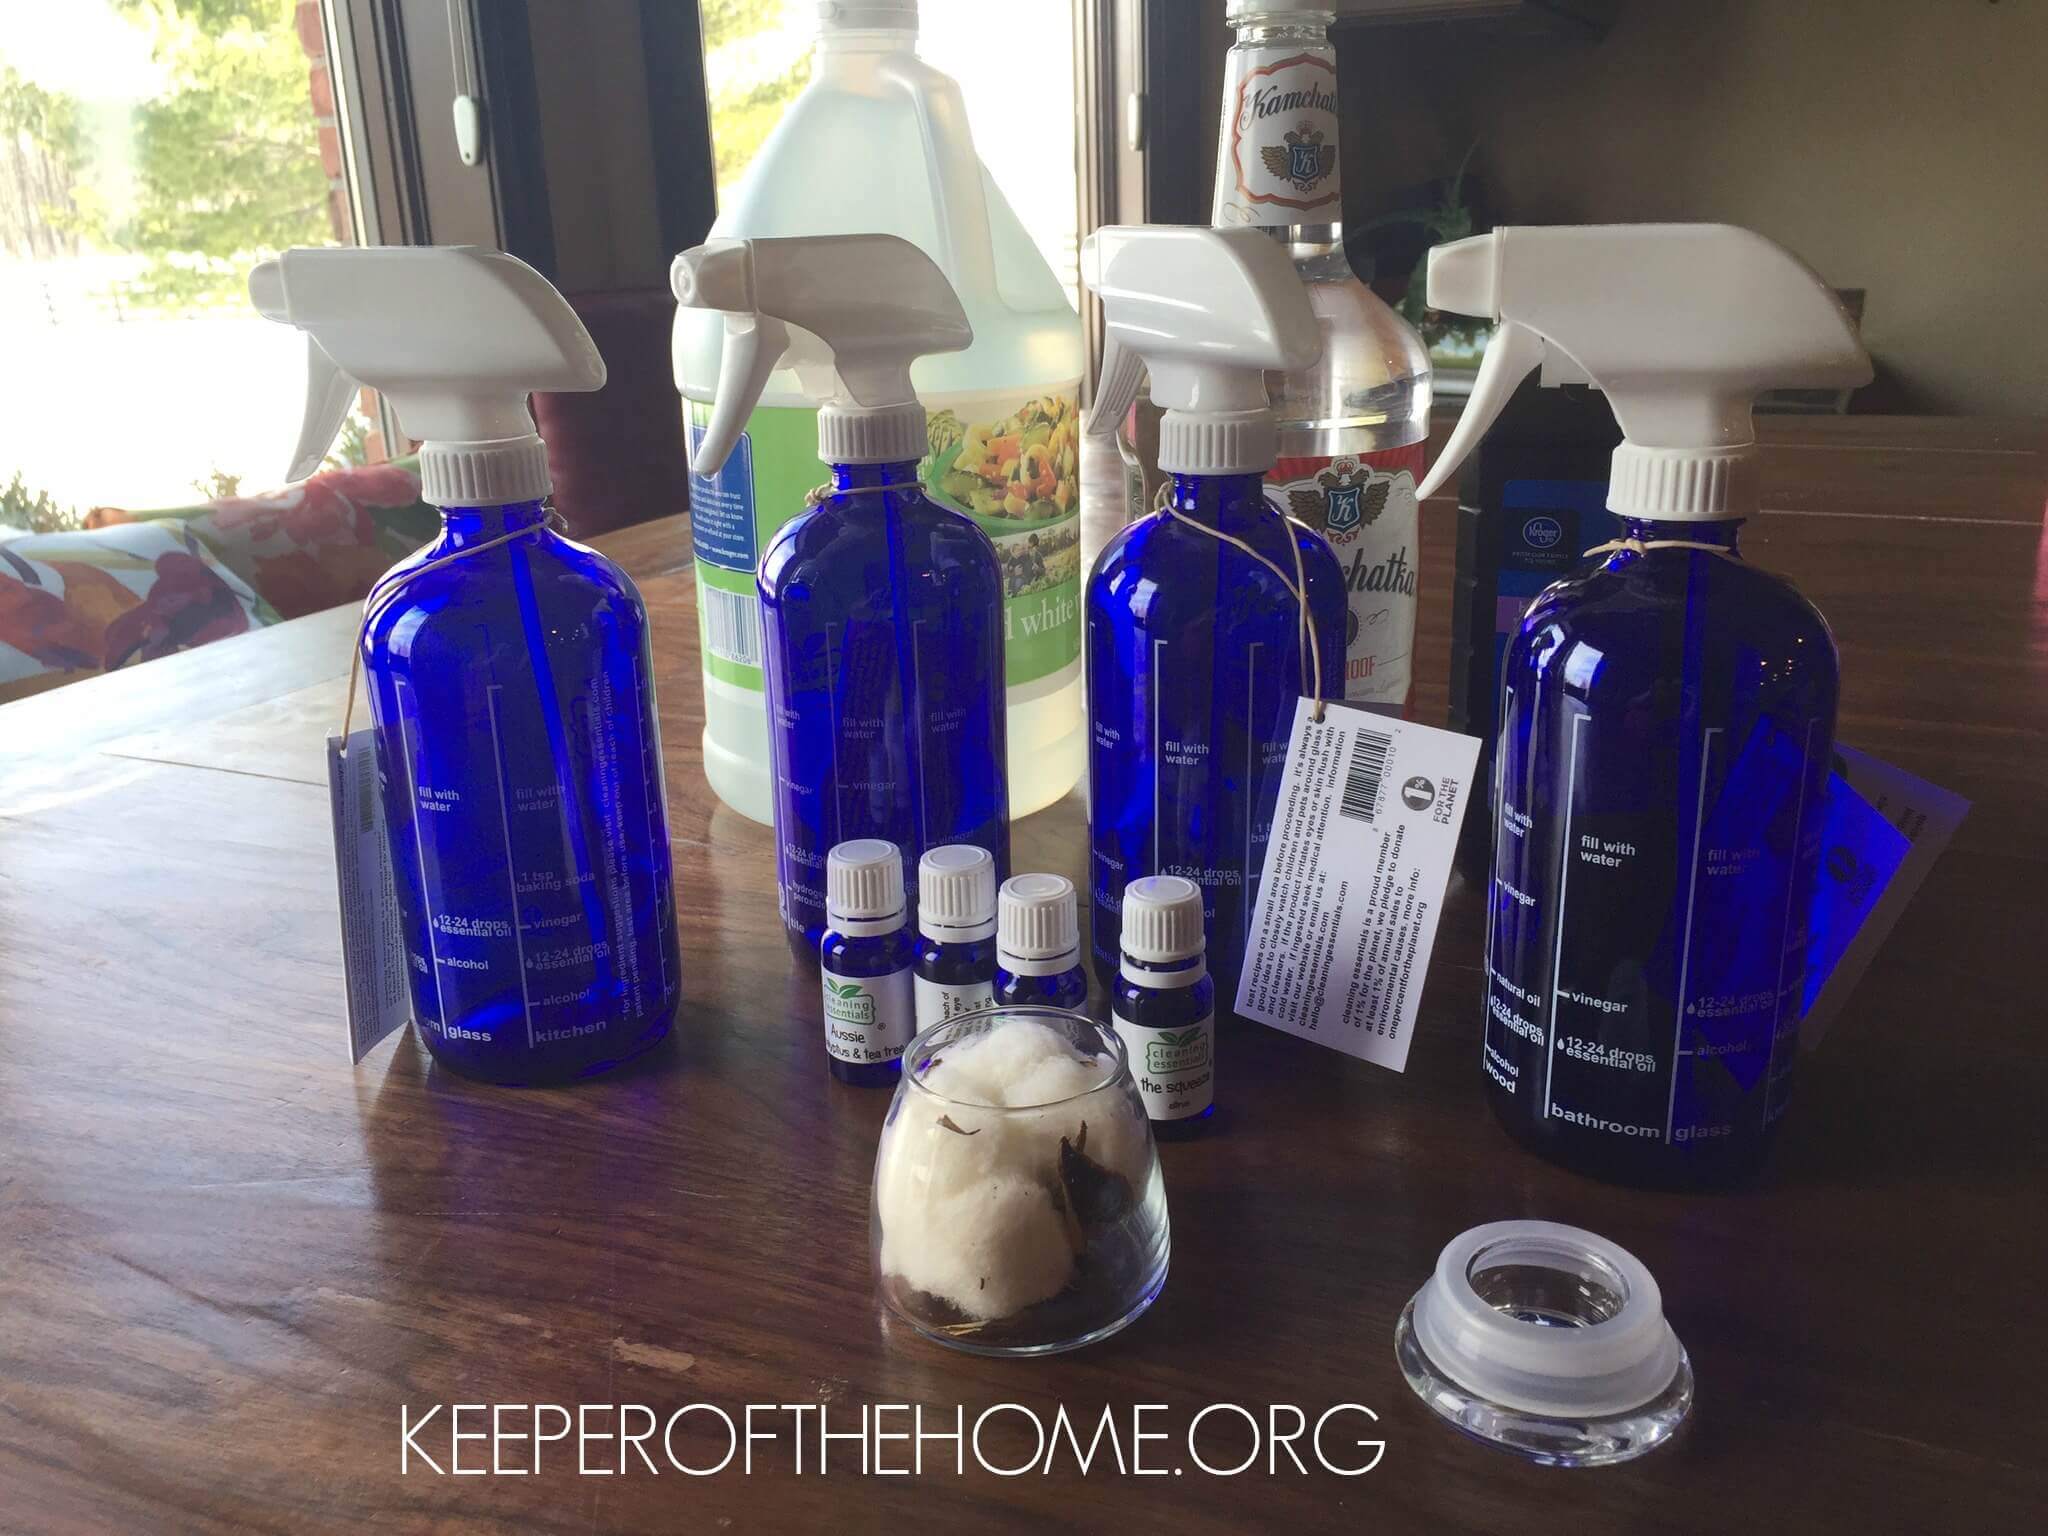 Did you know you can make your own chemical-free cleaning products in just a few easy steps? Here's how I did it – it was as simple as just filling a spray bottle!